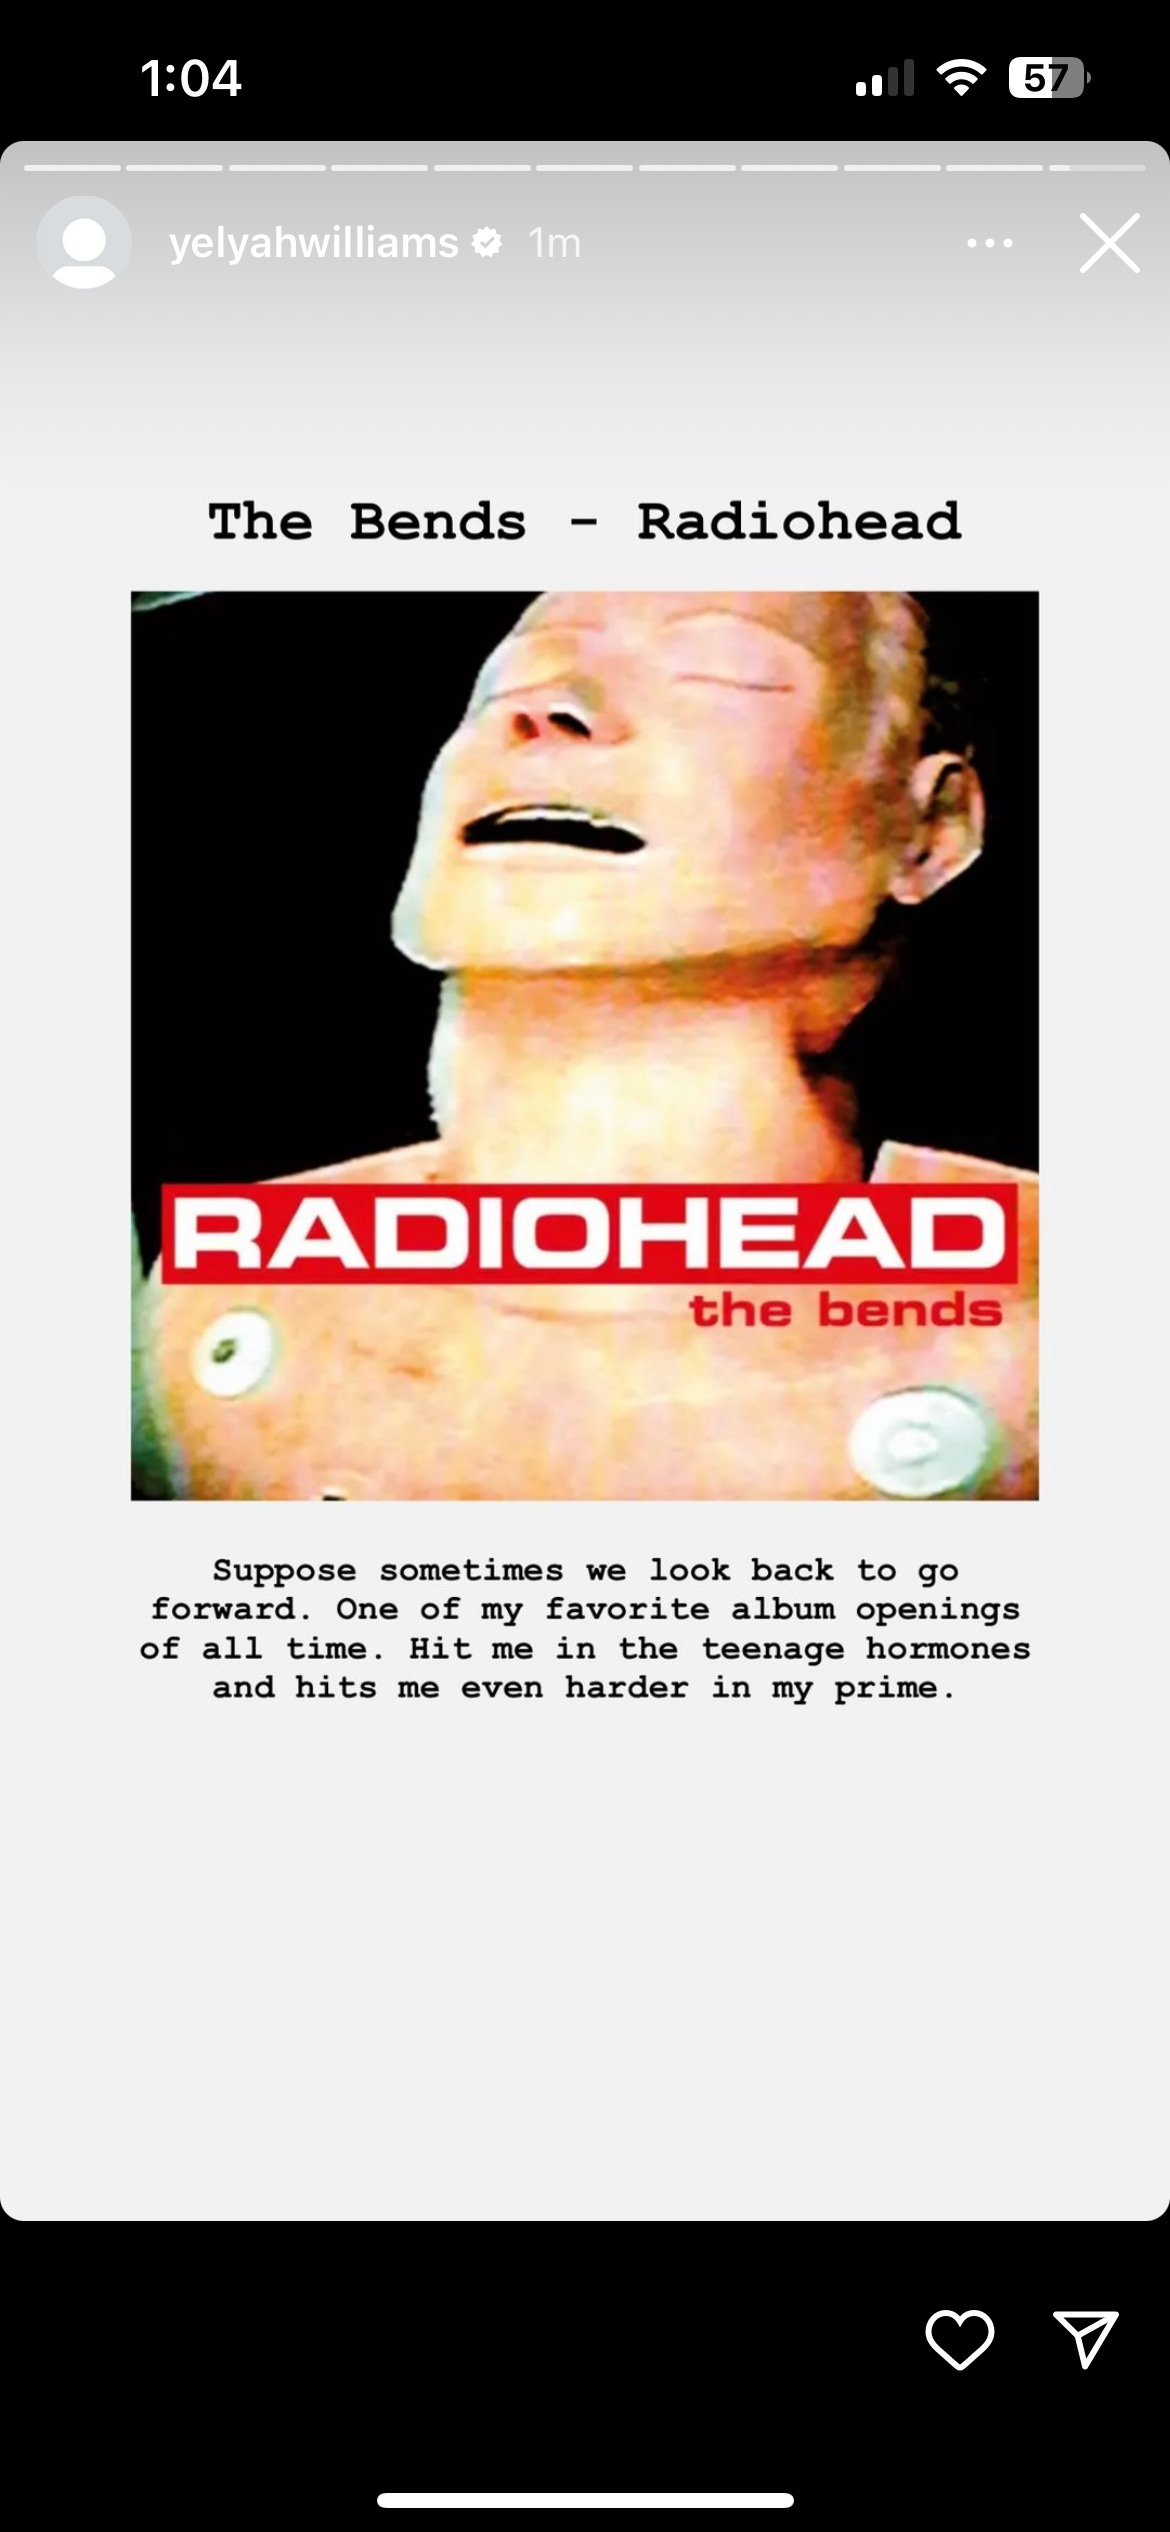 Screenshot of IG story from Hayley Williams showing cover of The Bends with note: Suppose sometimes we look back to go forward. One of my favorite album openings of all time. Hit me in the teenage hormones and hits me even harder in my prime."